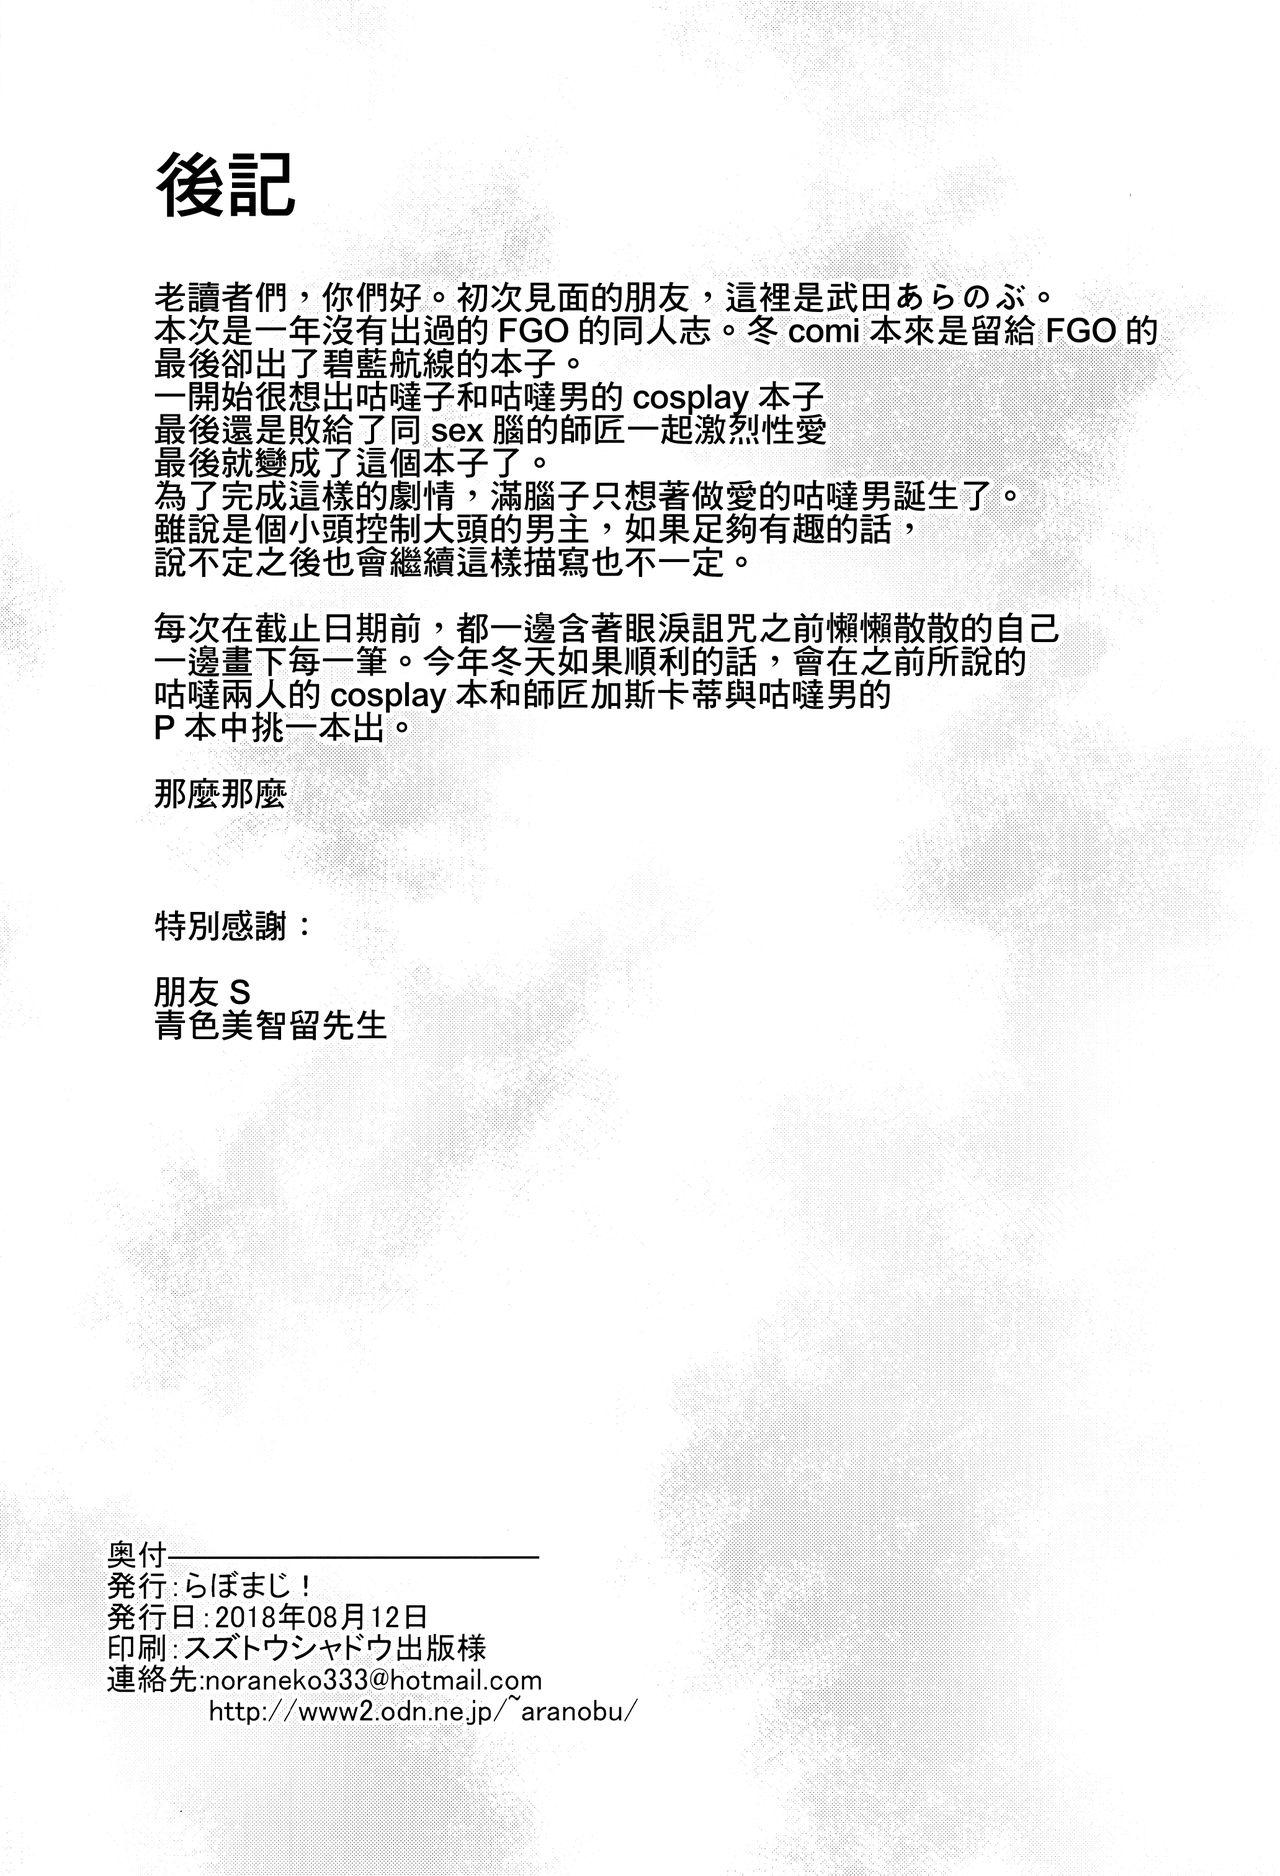 - Chinese translation (19 pages)-第1章-图片869